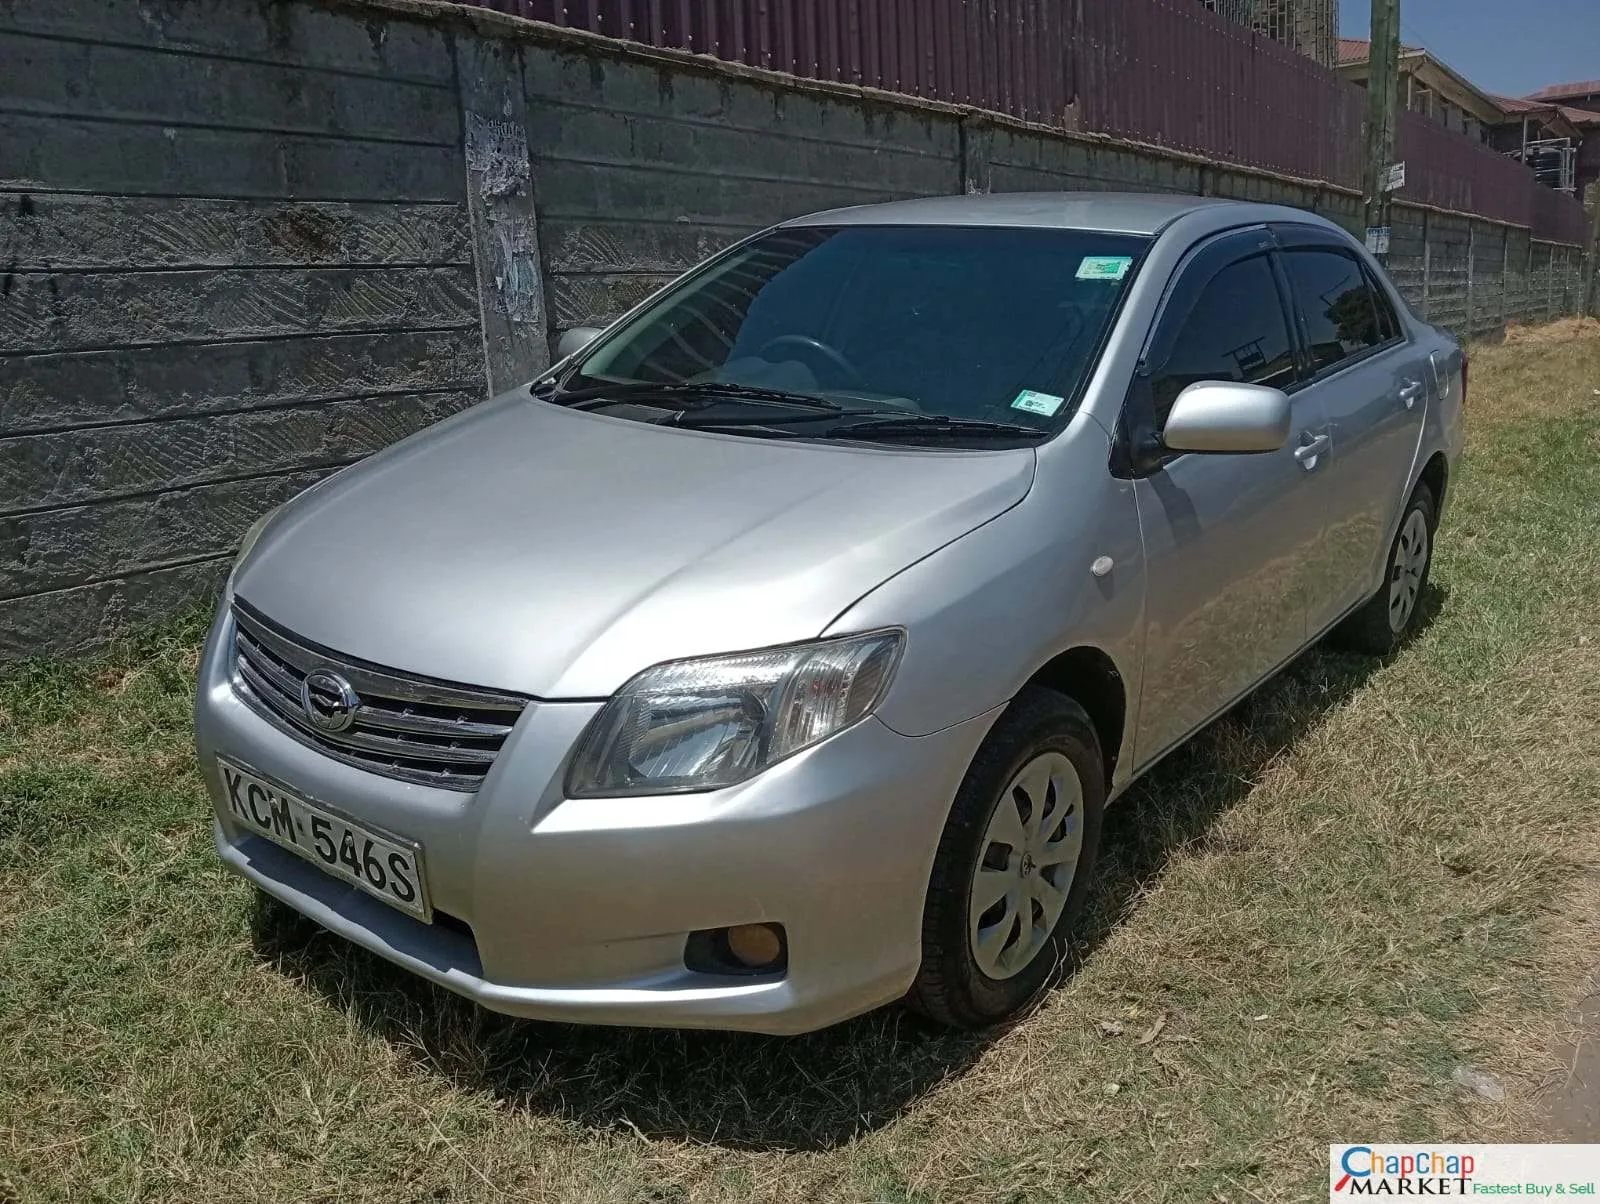 Toyota AXIO for sale in Kenya 🔥 CHEAPEST You pay 30% Deposit Trade in Ok EXCLUSIVE